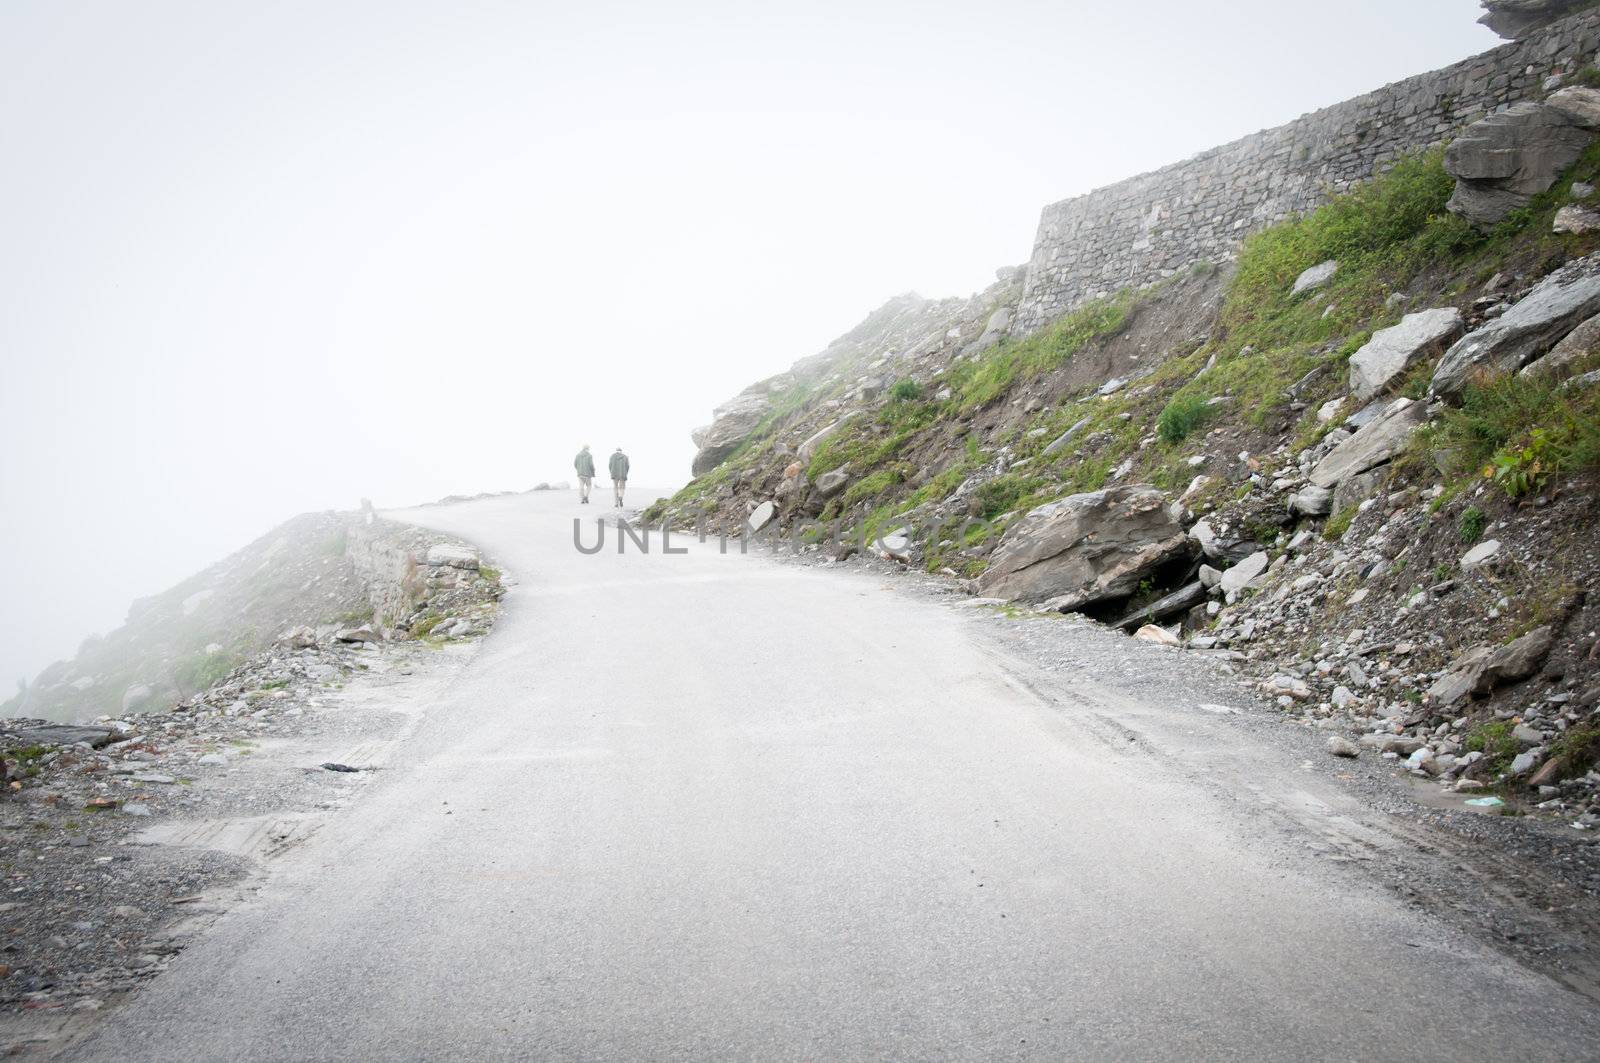 Two man on a mountain road in mystic fog